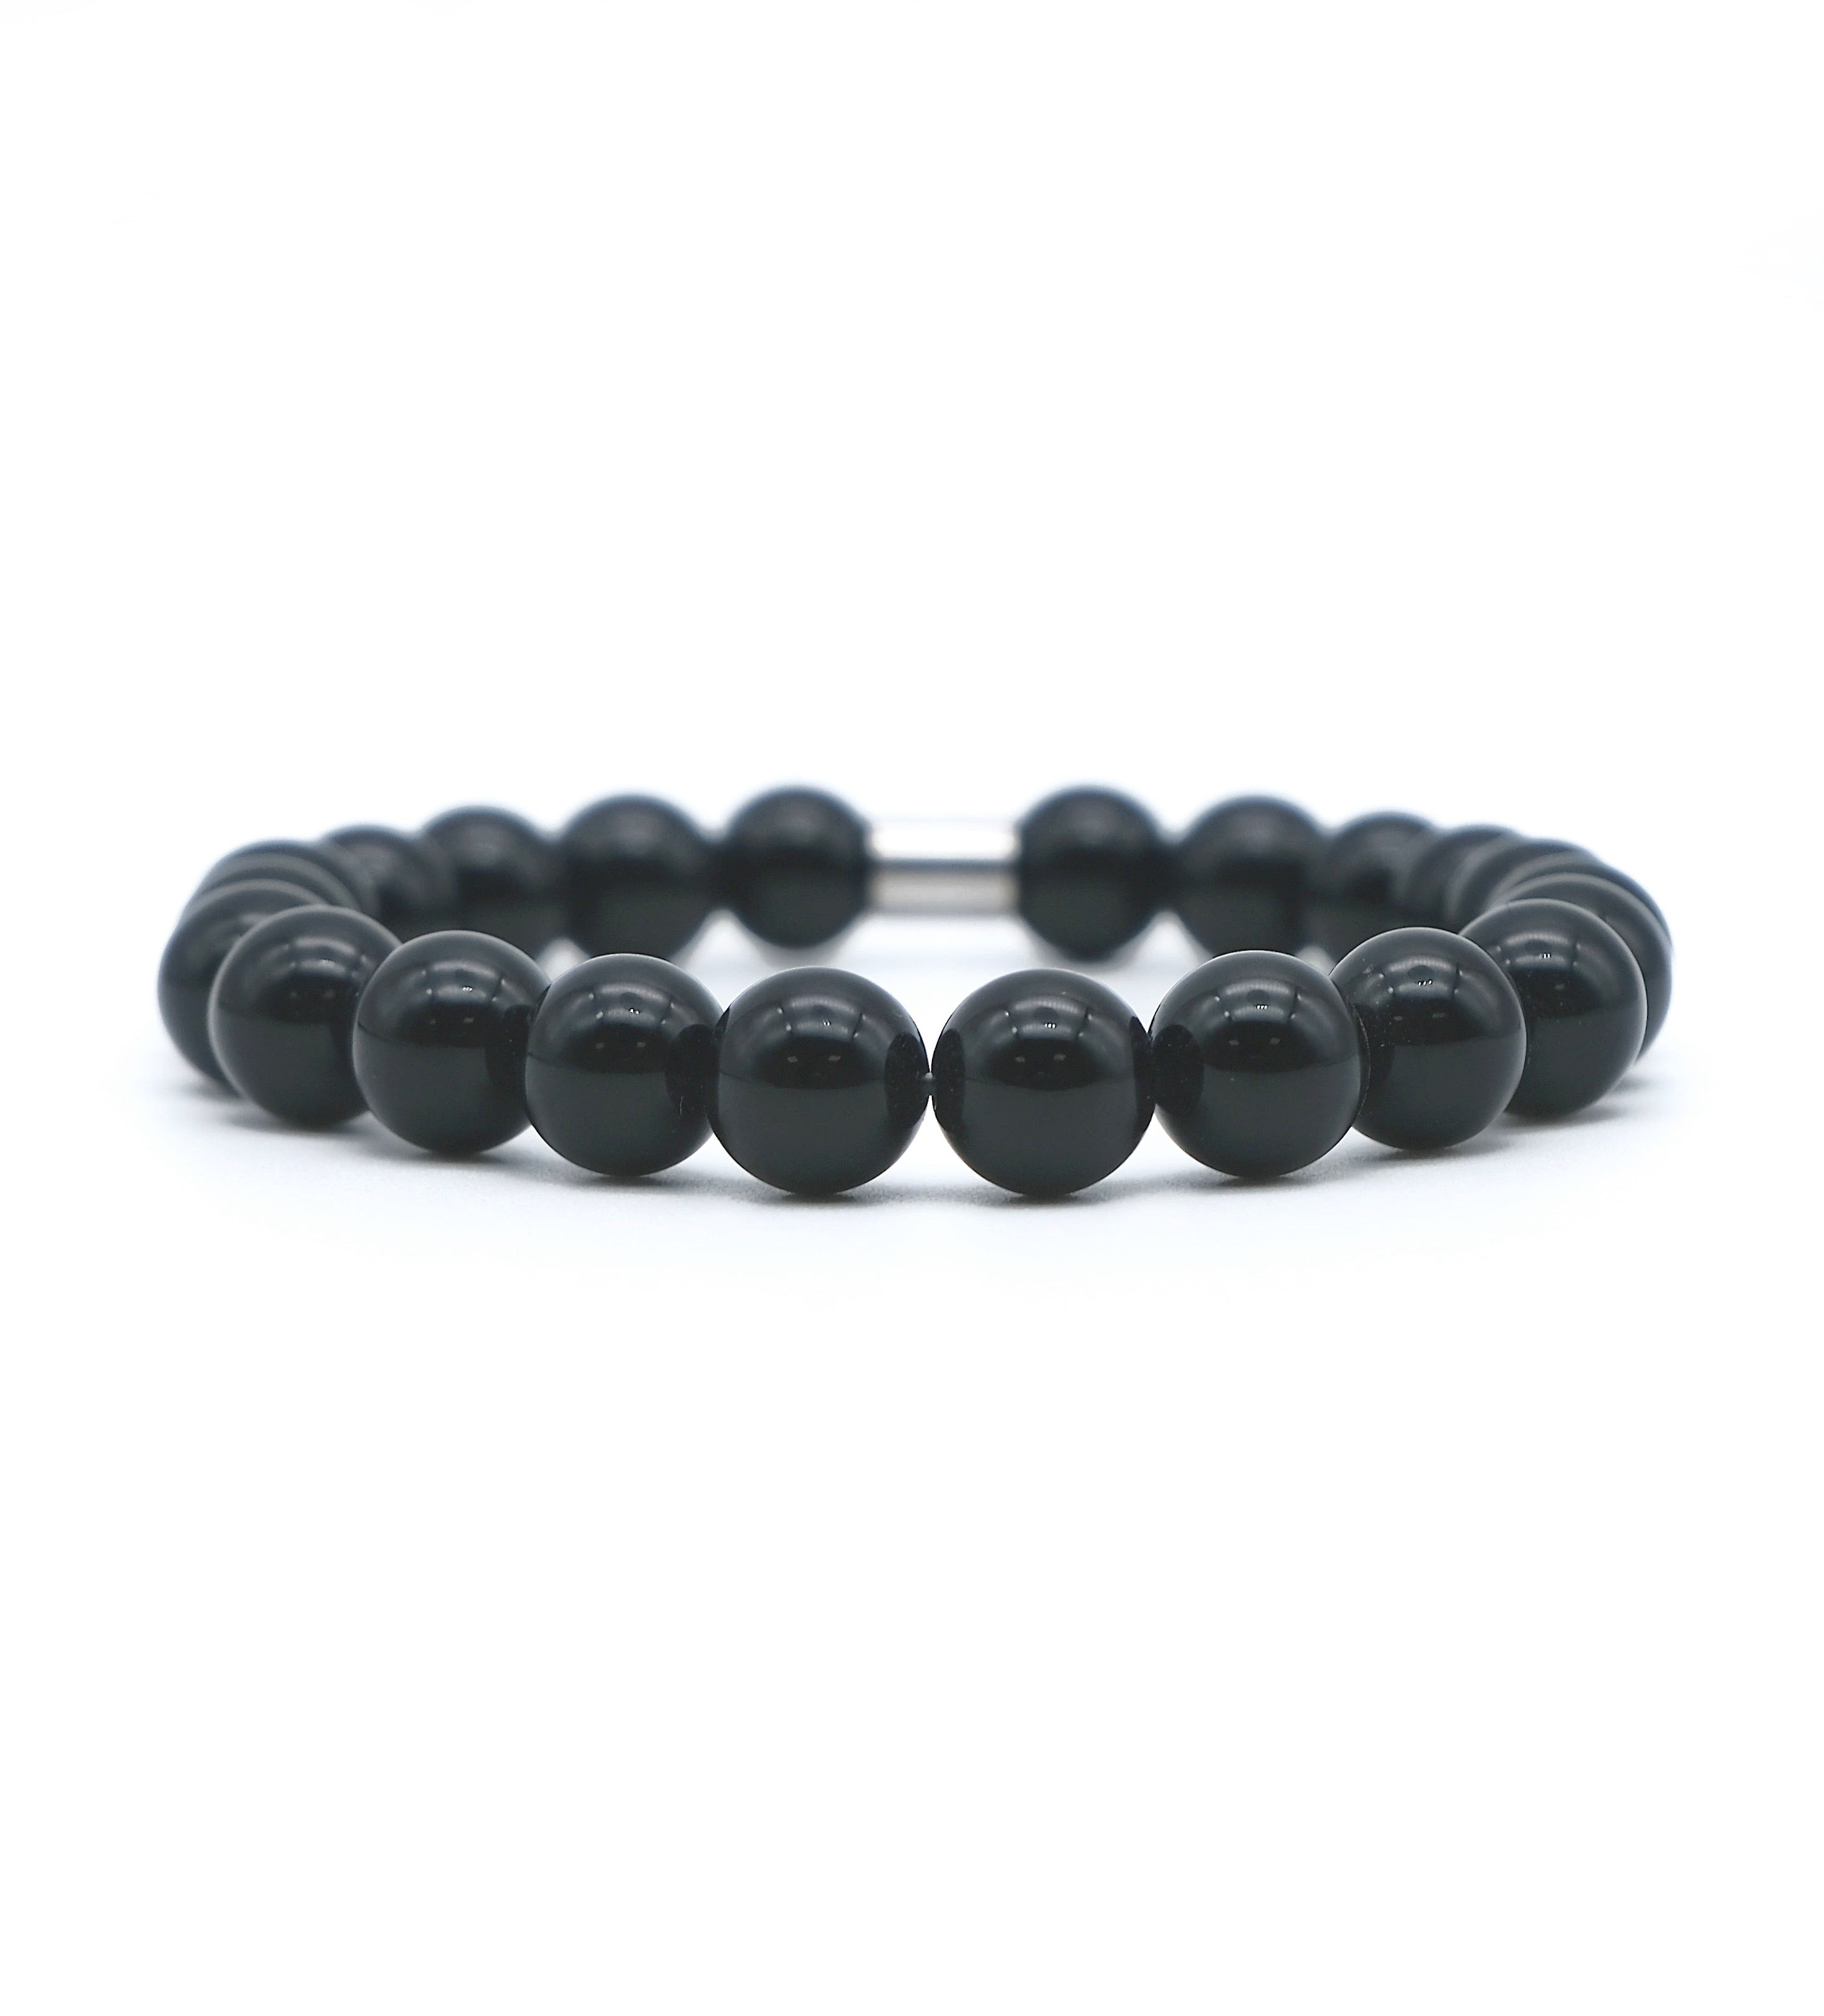 onyx gemstone bracelet in 10mm beads with stainless steel accessory